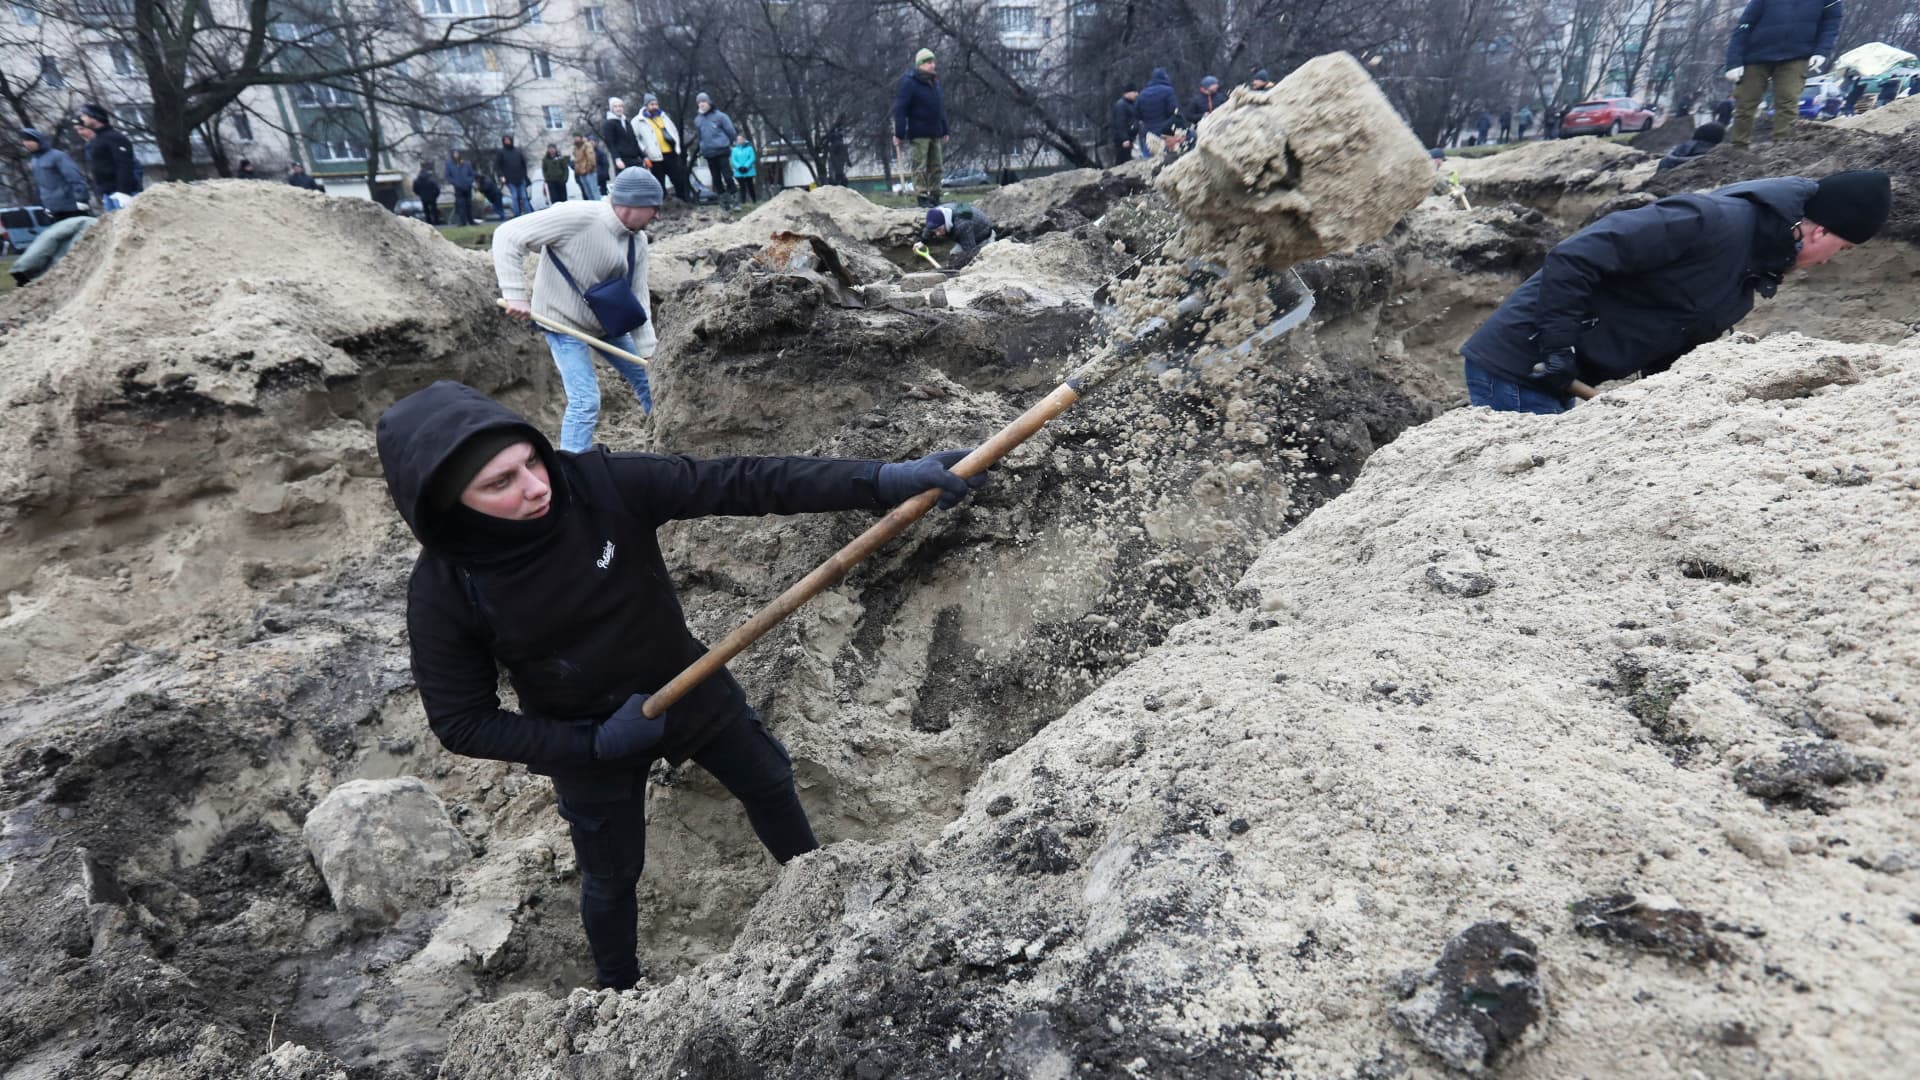 Volunteers dig trenches, as Russia's invasion of Ukraine continues, in Kyiv, Ukraine March 3, 2022.